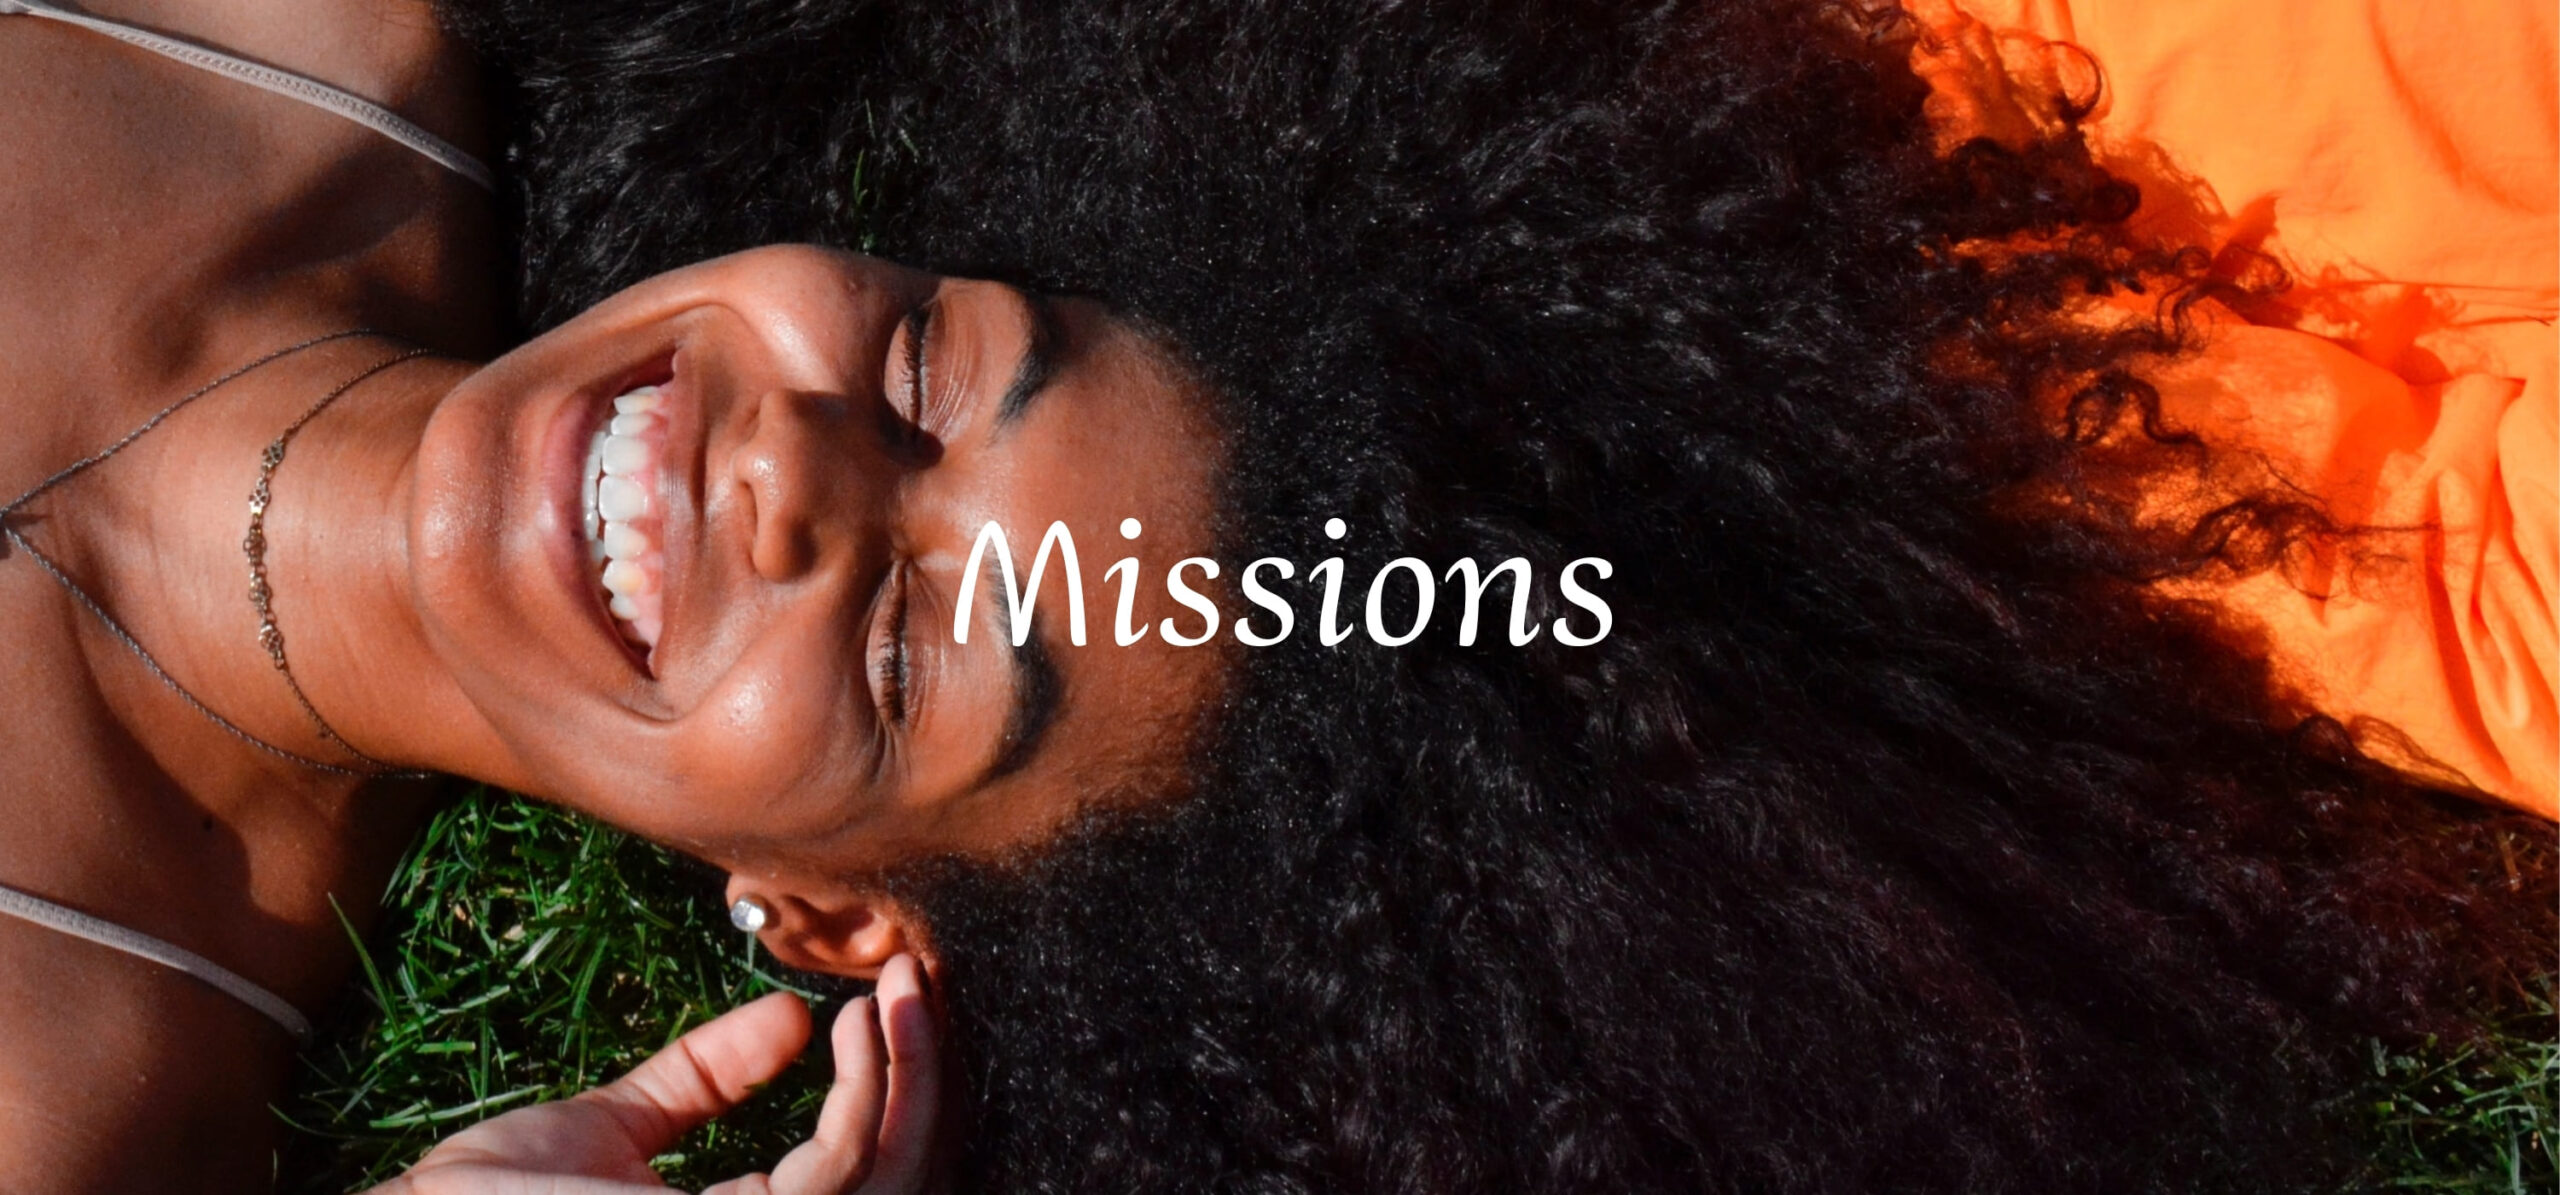 Missions